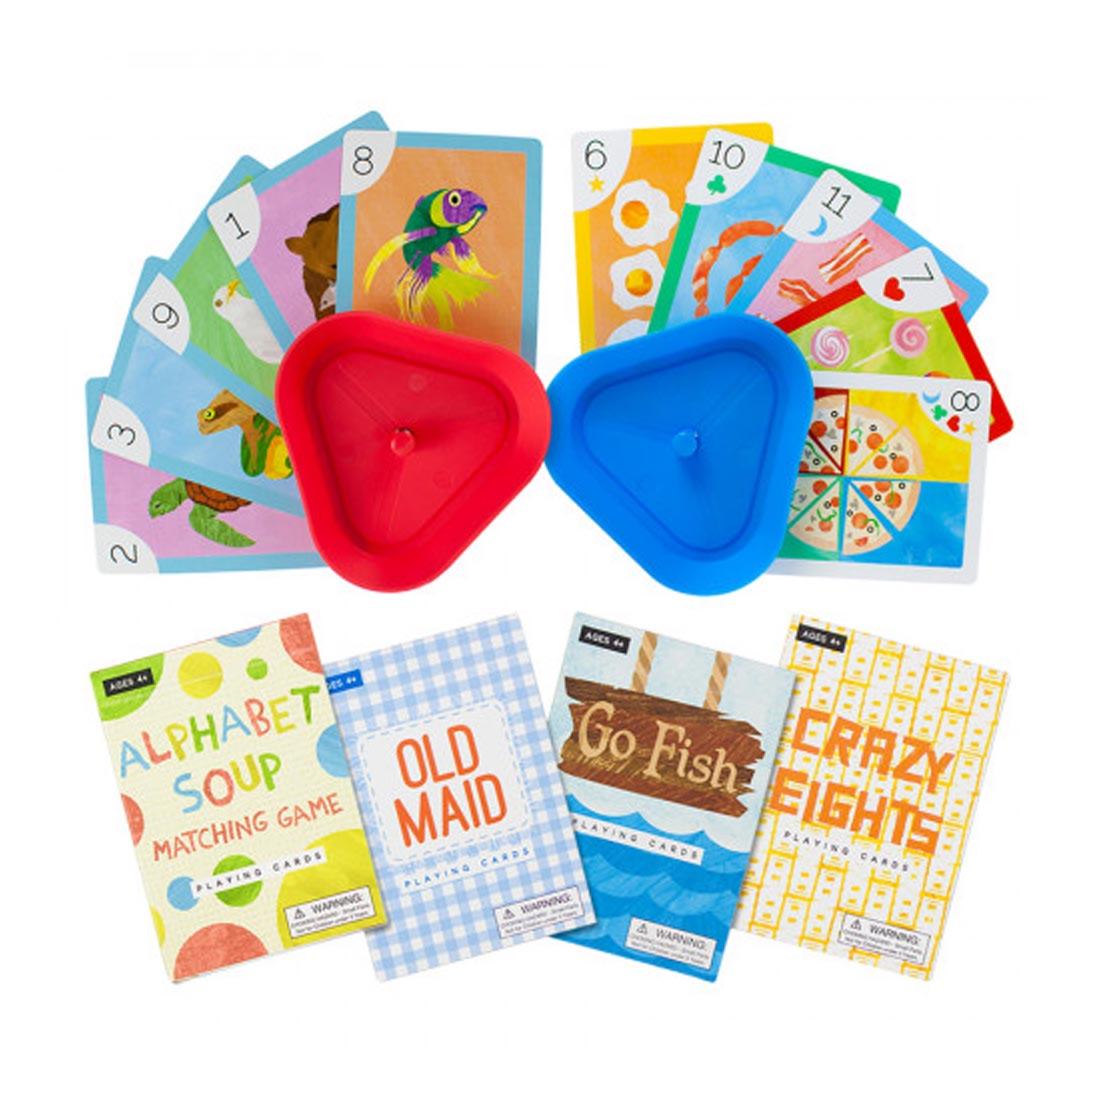 Alphabet Soup, Old Maid, Go Fish and Crazy Eights with card holders